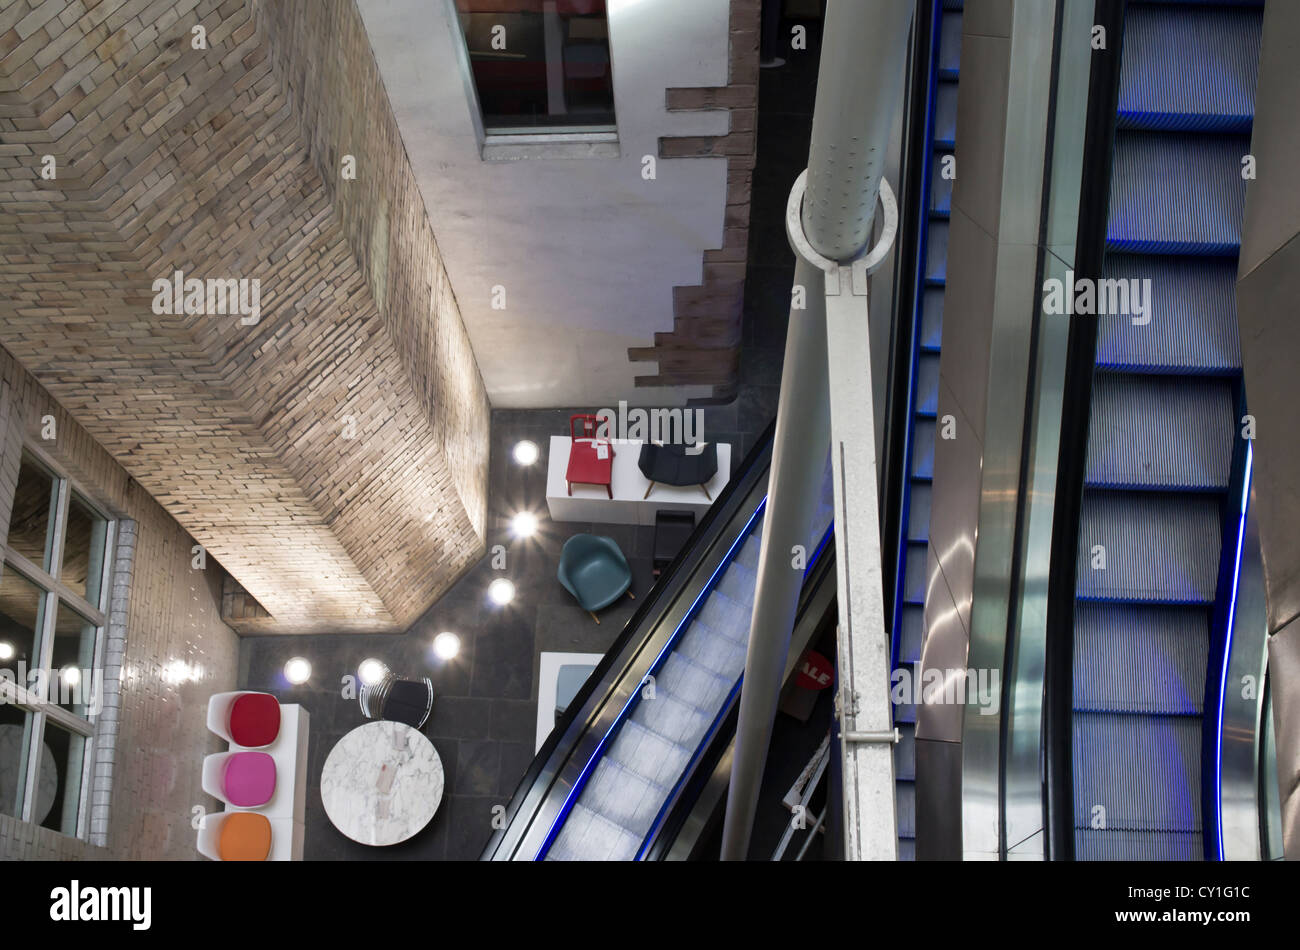 Internal view of the Lighthouse Gallery, Glasgow, Scotland with escalators Stock Photo